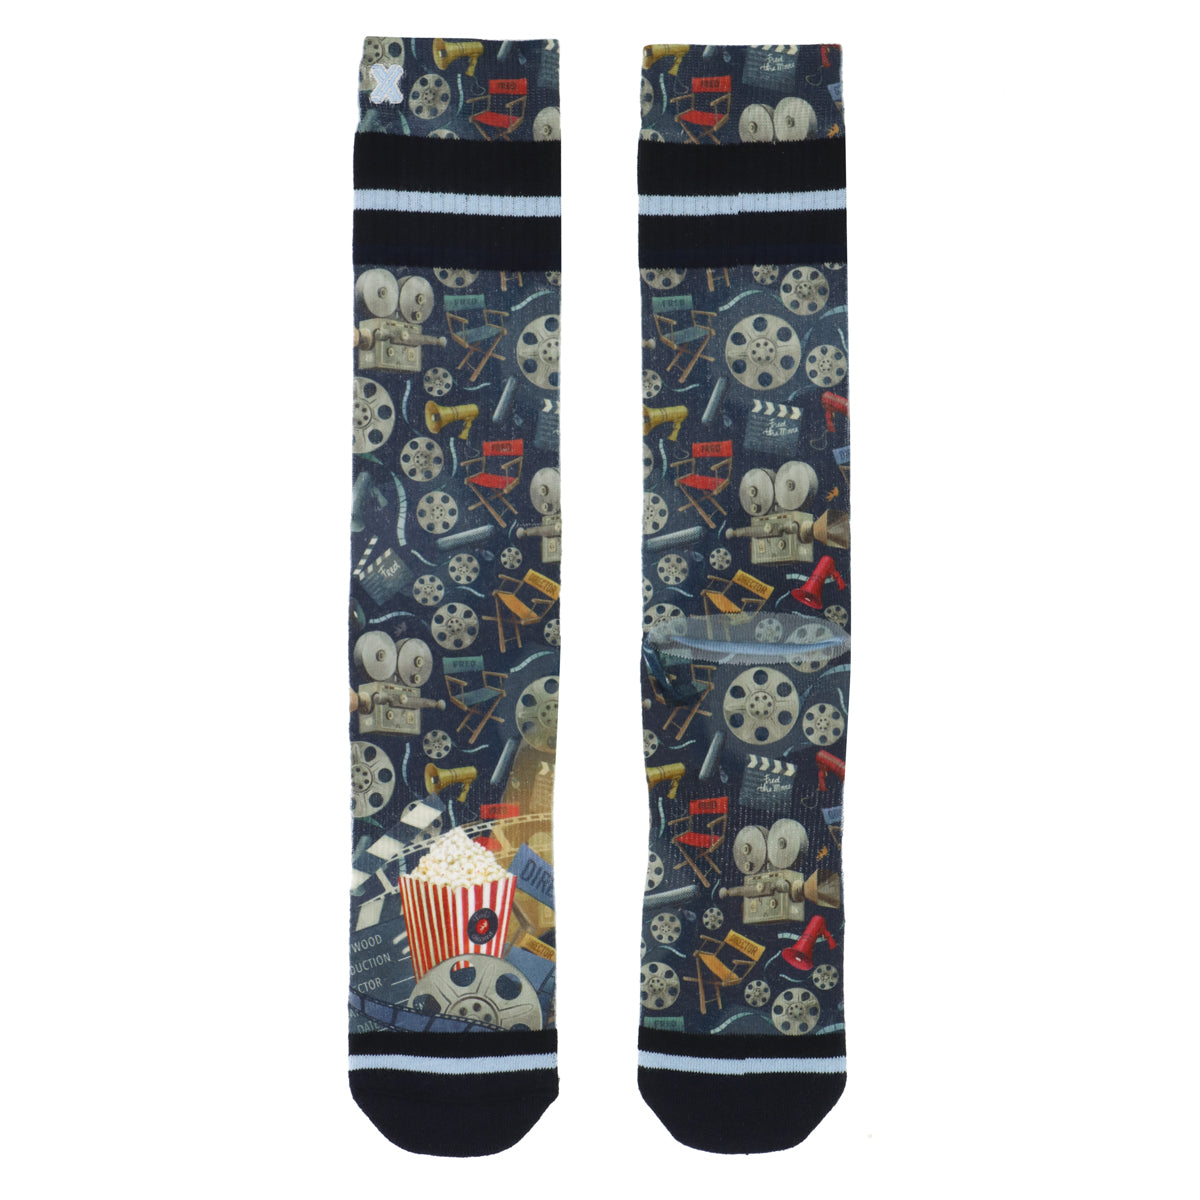 XPOOOS x AFNF Director chaussettes pour hommes